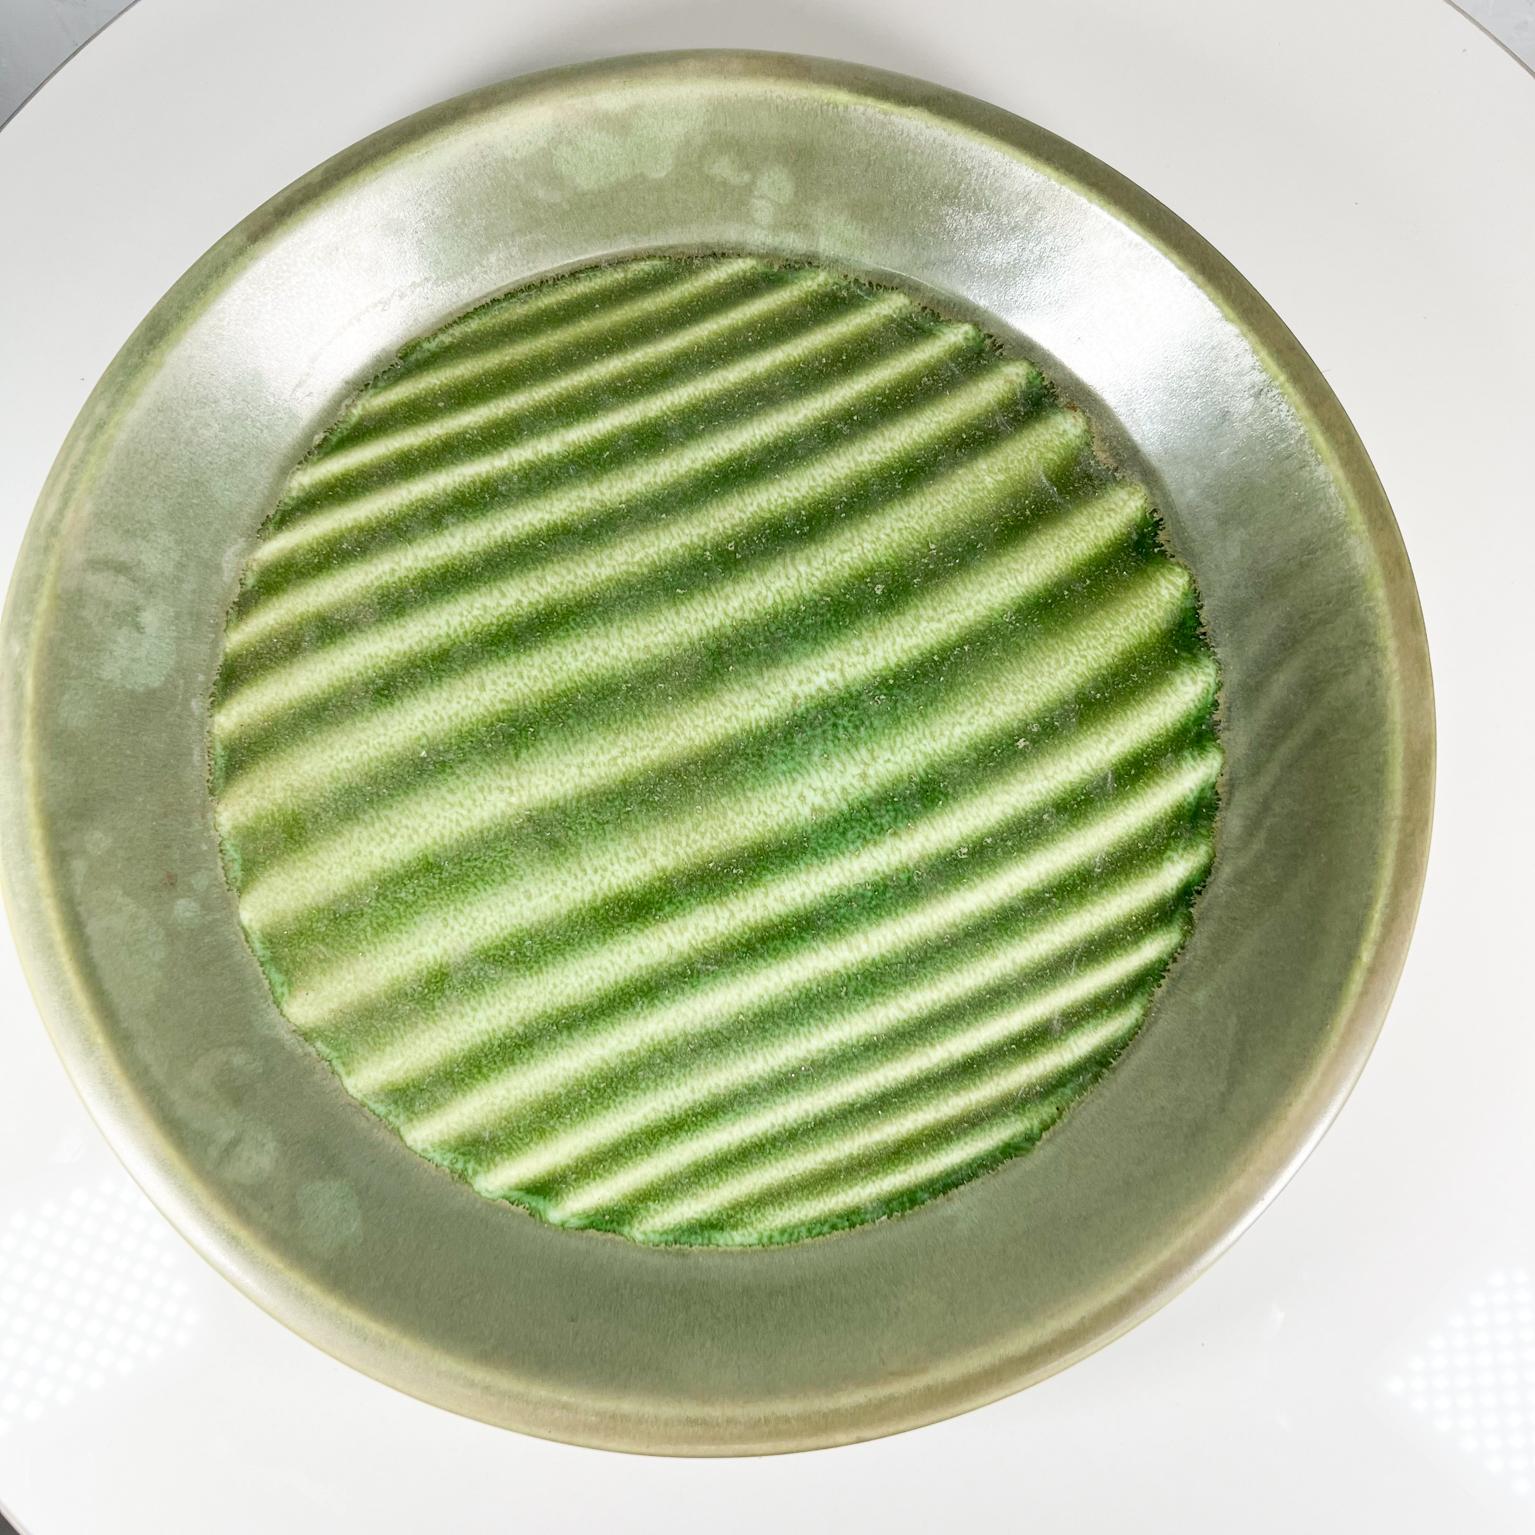 1970s Fabulous modernist optical art green plate USA.
Made USA.
Measures: 14.25 diameter x 1.75 tall
Original Vintage Condition.
See images provided.
 